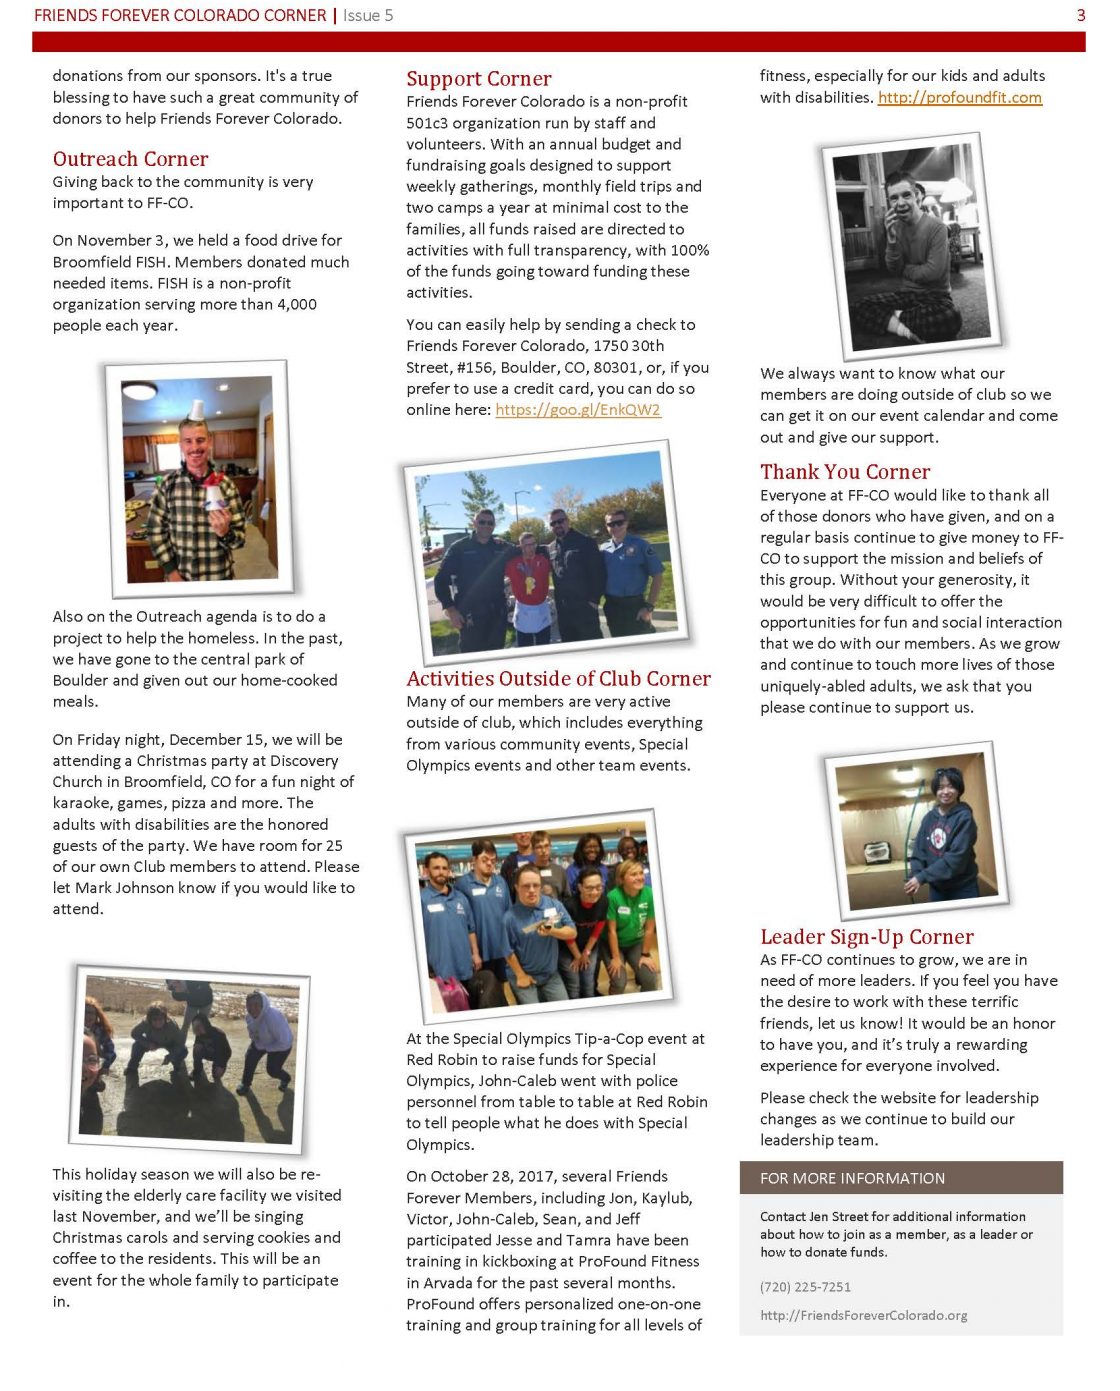 Newsletter Issue 5 - page 3